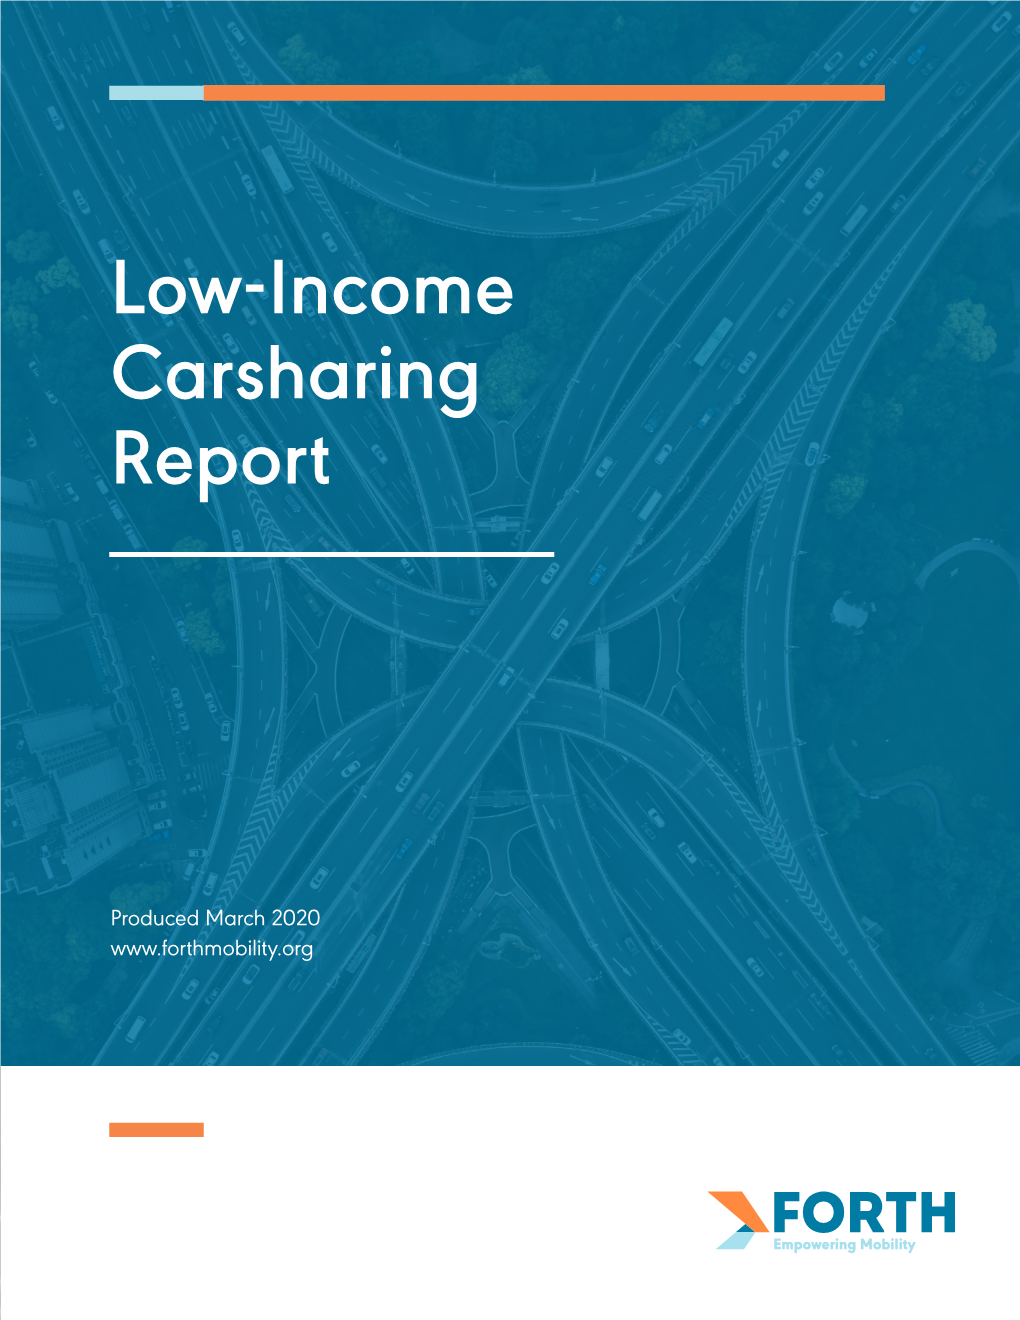 Low-Income Carsharing Report